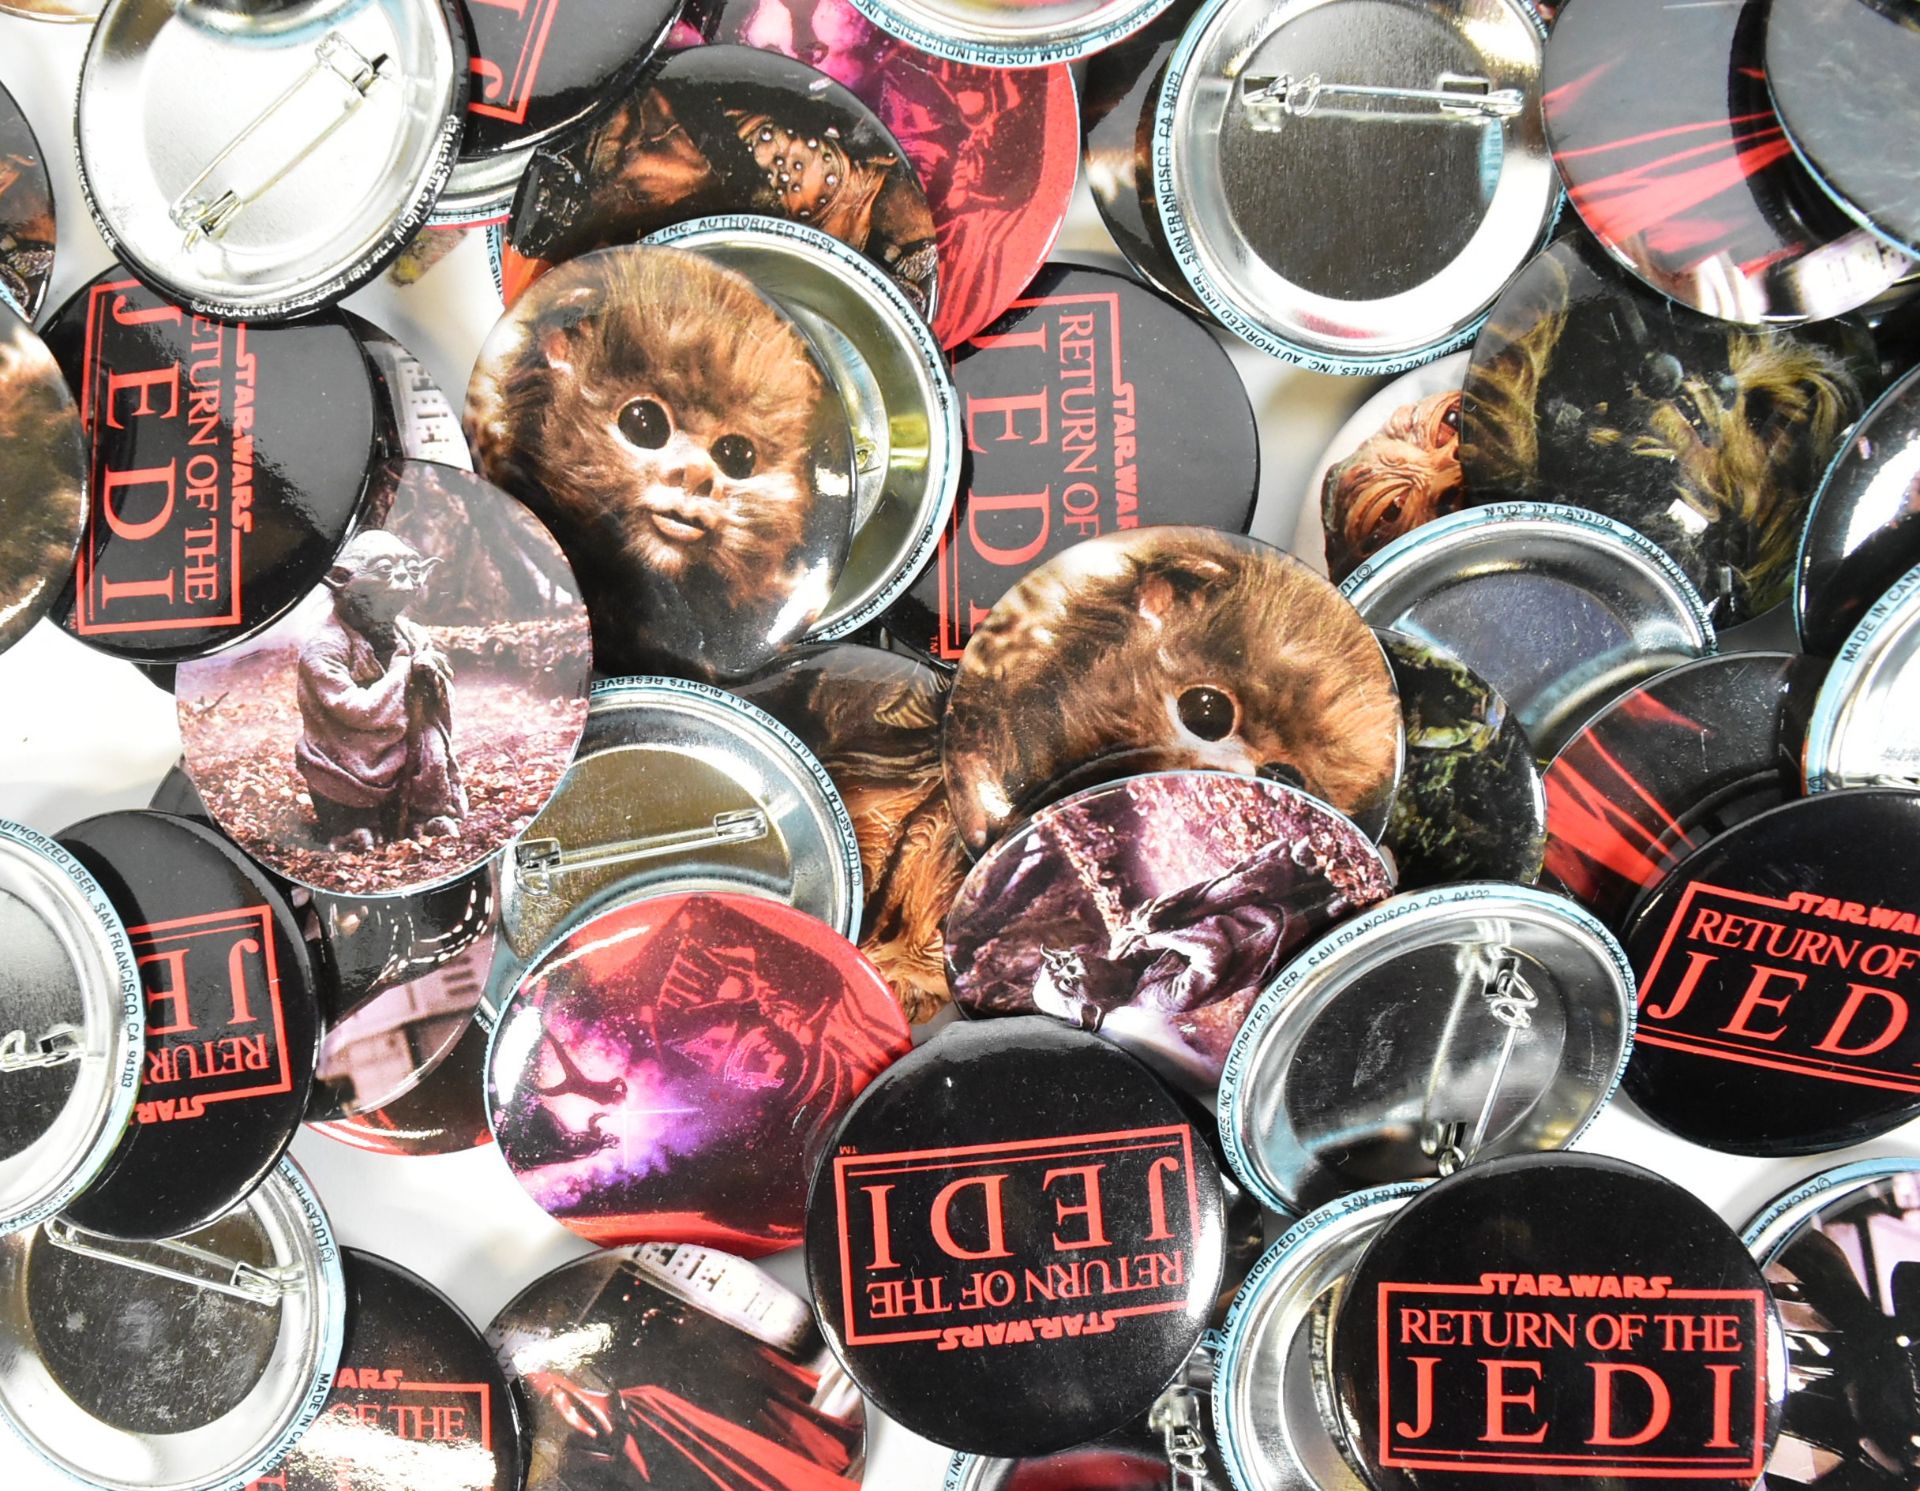 STAR WARS - RETURN OF THE JEDI - COUNTER TOP BADGE DISPLAY - Image 2 of 4